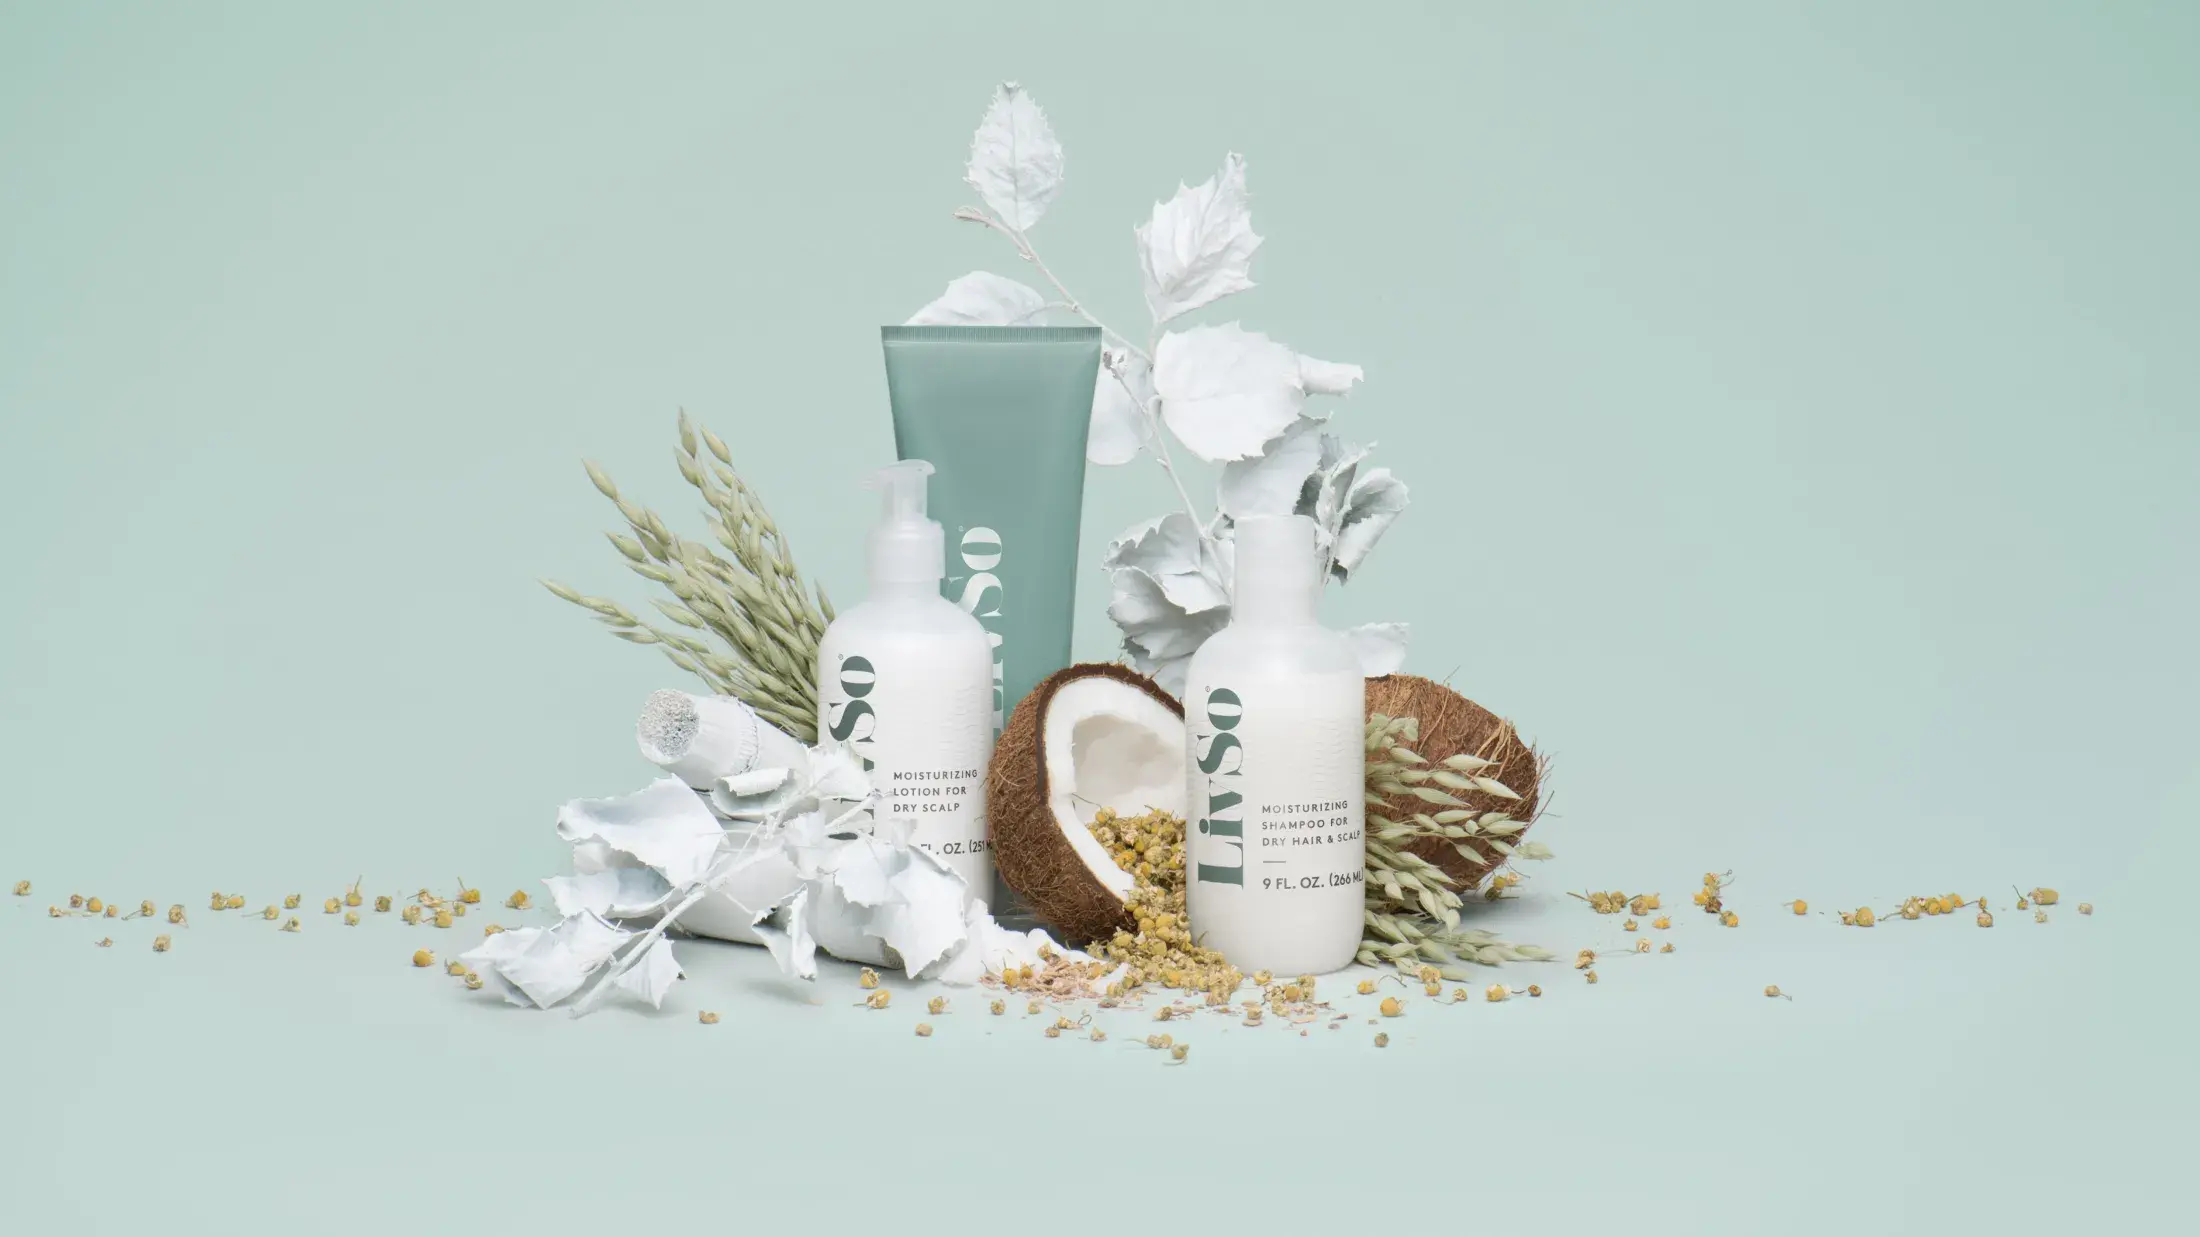 LivSo hair products staged with ingredients on a light sage/mint color